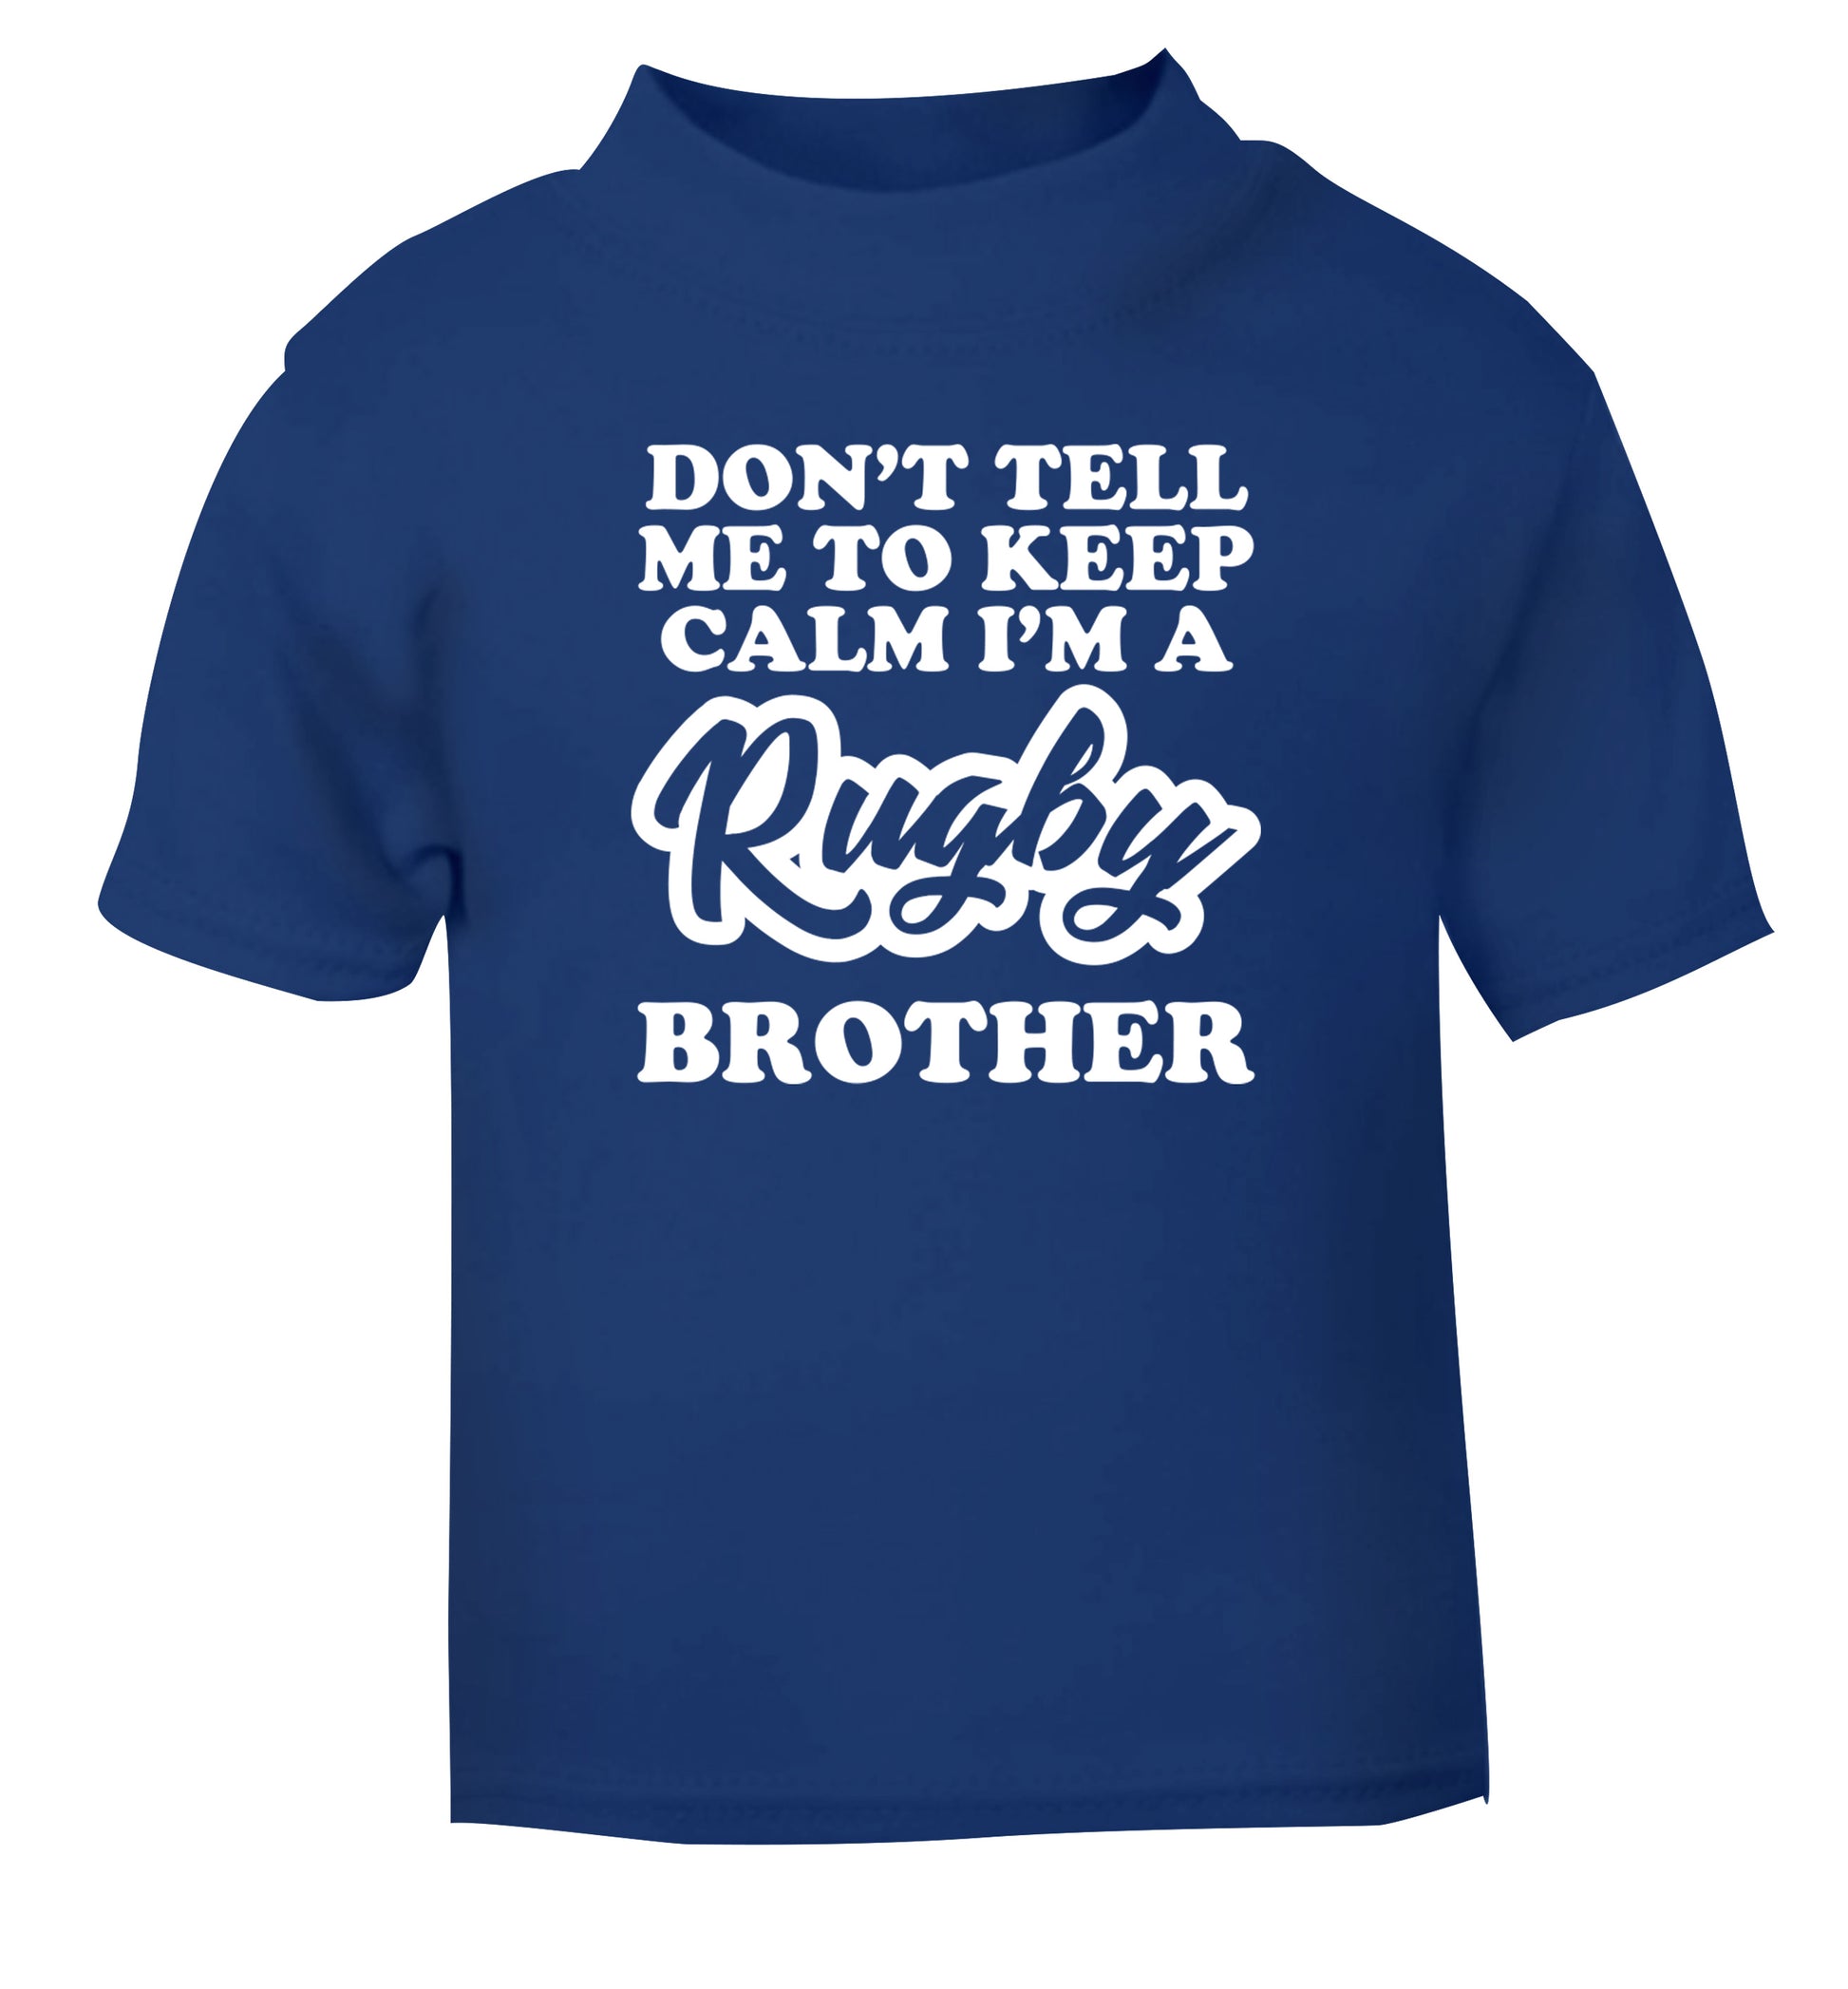 Don't tell me keep calm I'm a rugby brother blue Baby Toddler Tshirt 2 Years